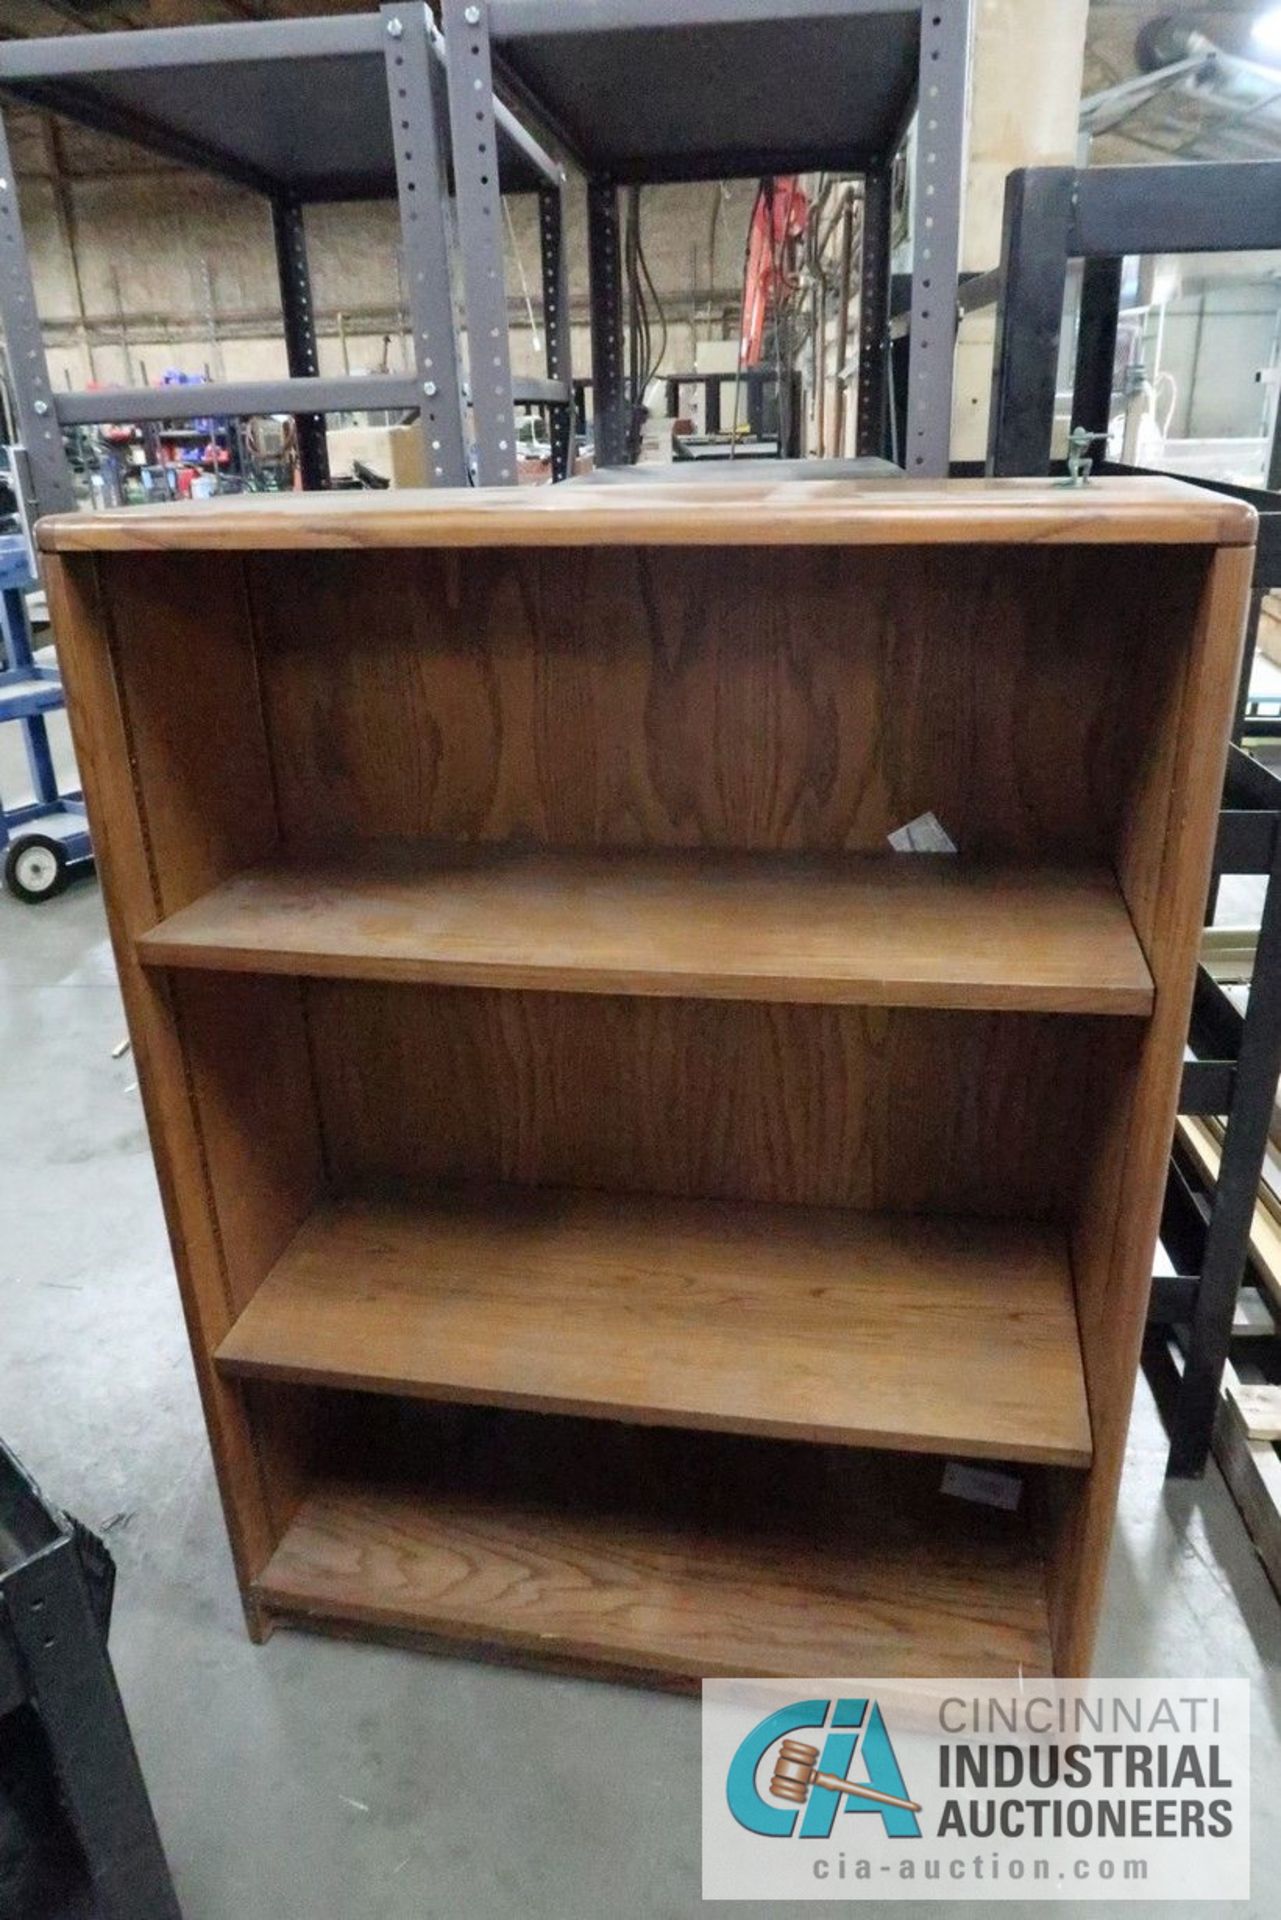 (LOT) MISCELLANEOUS STEEL AND WOOD SHELVES - Image 2 of 4